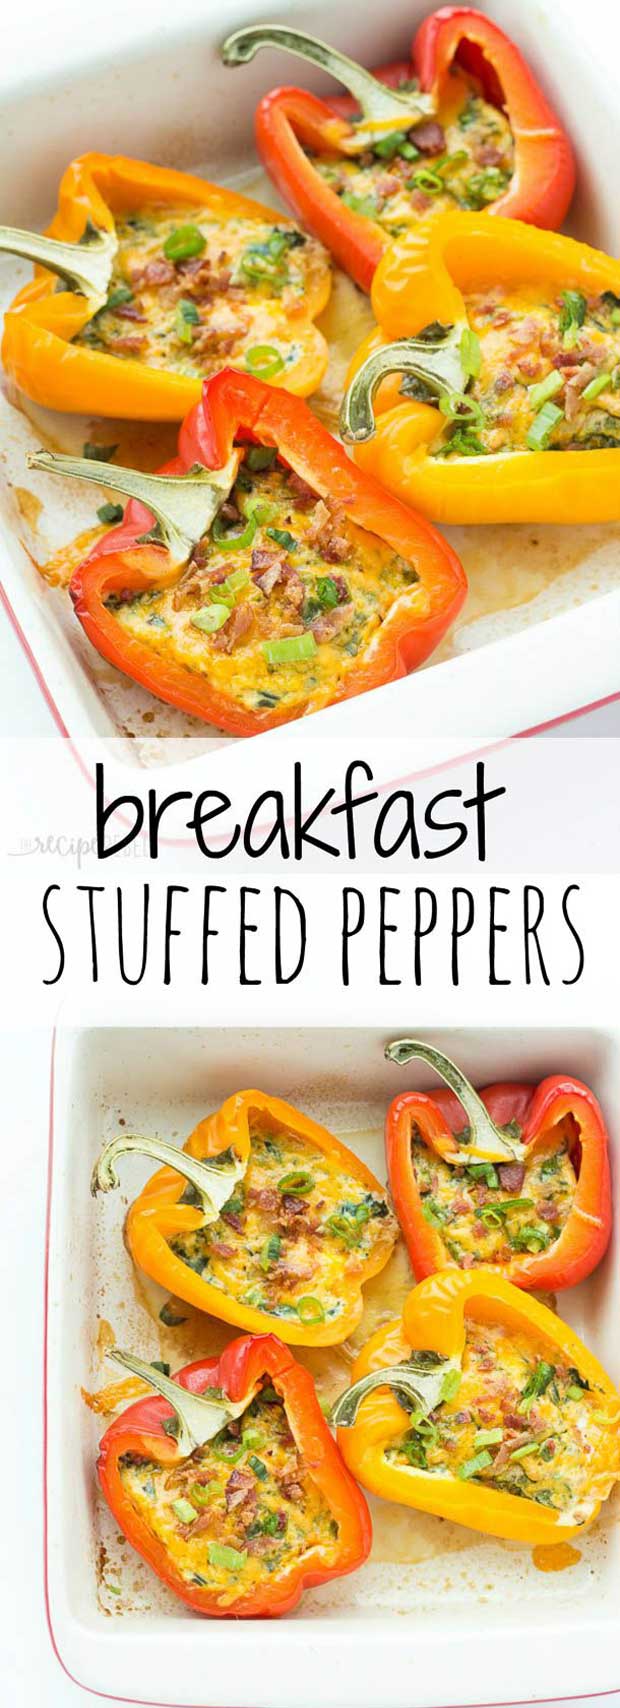 10 Low Carb Breakfasts Easily to Make-Ahead and Keep Entire Week